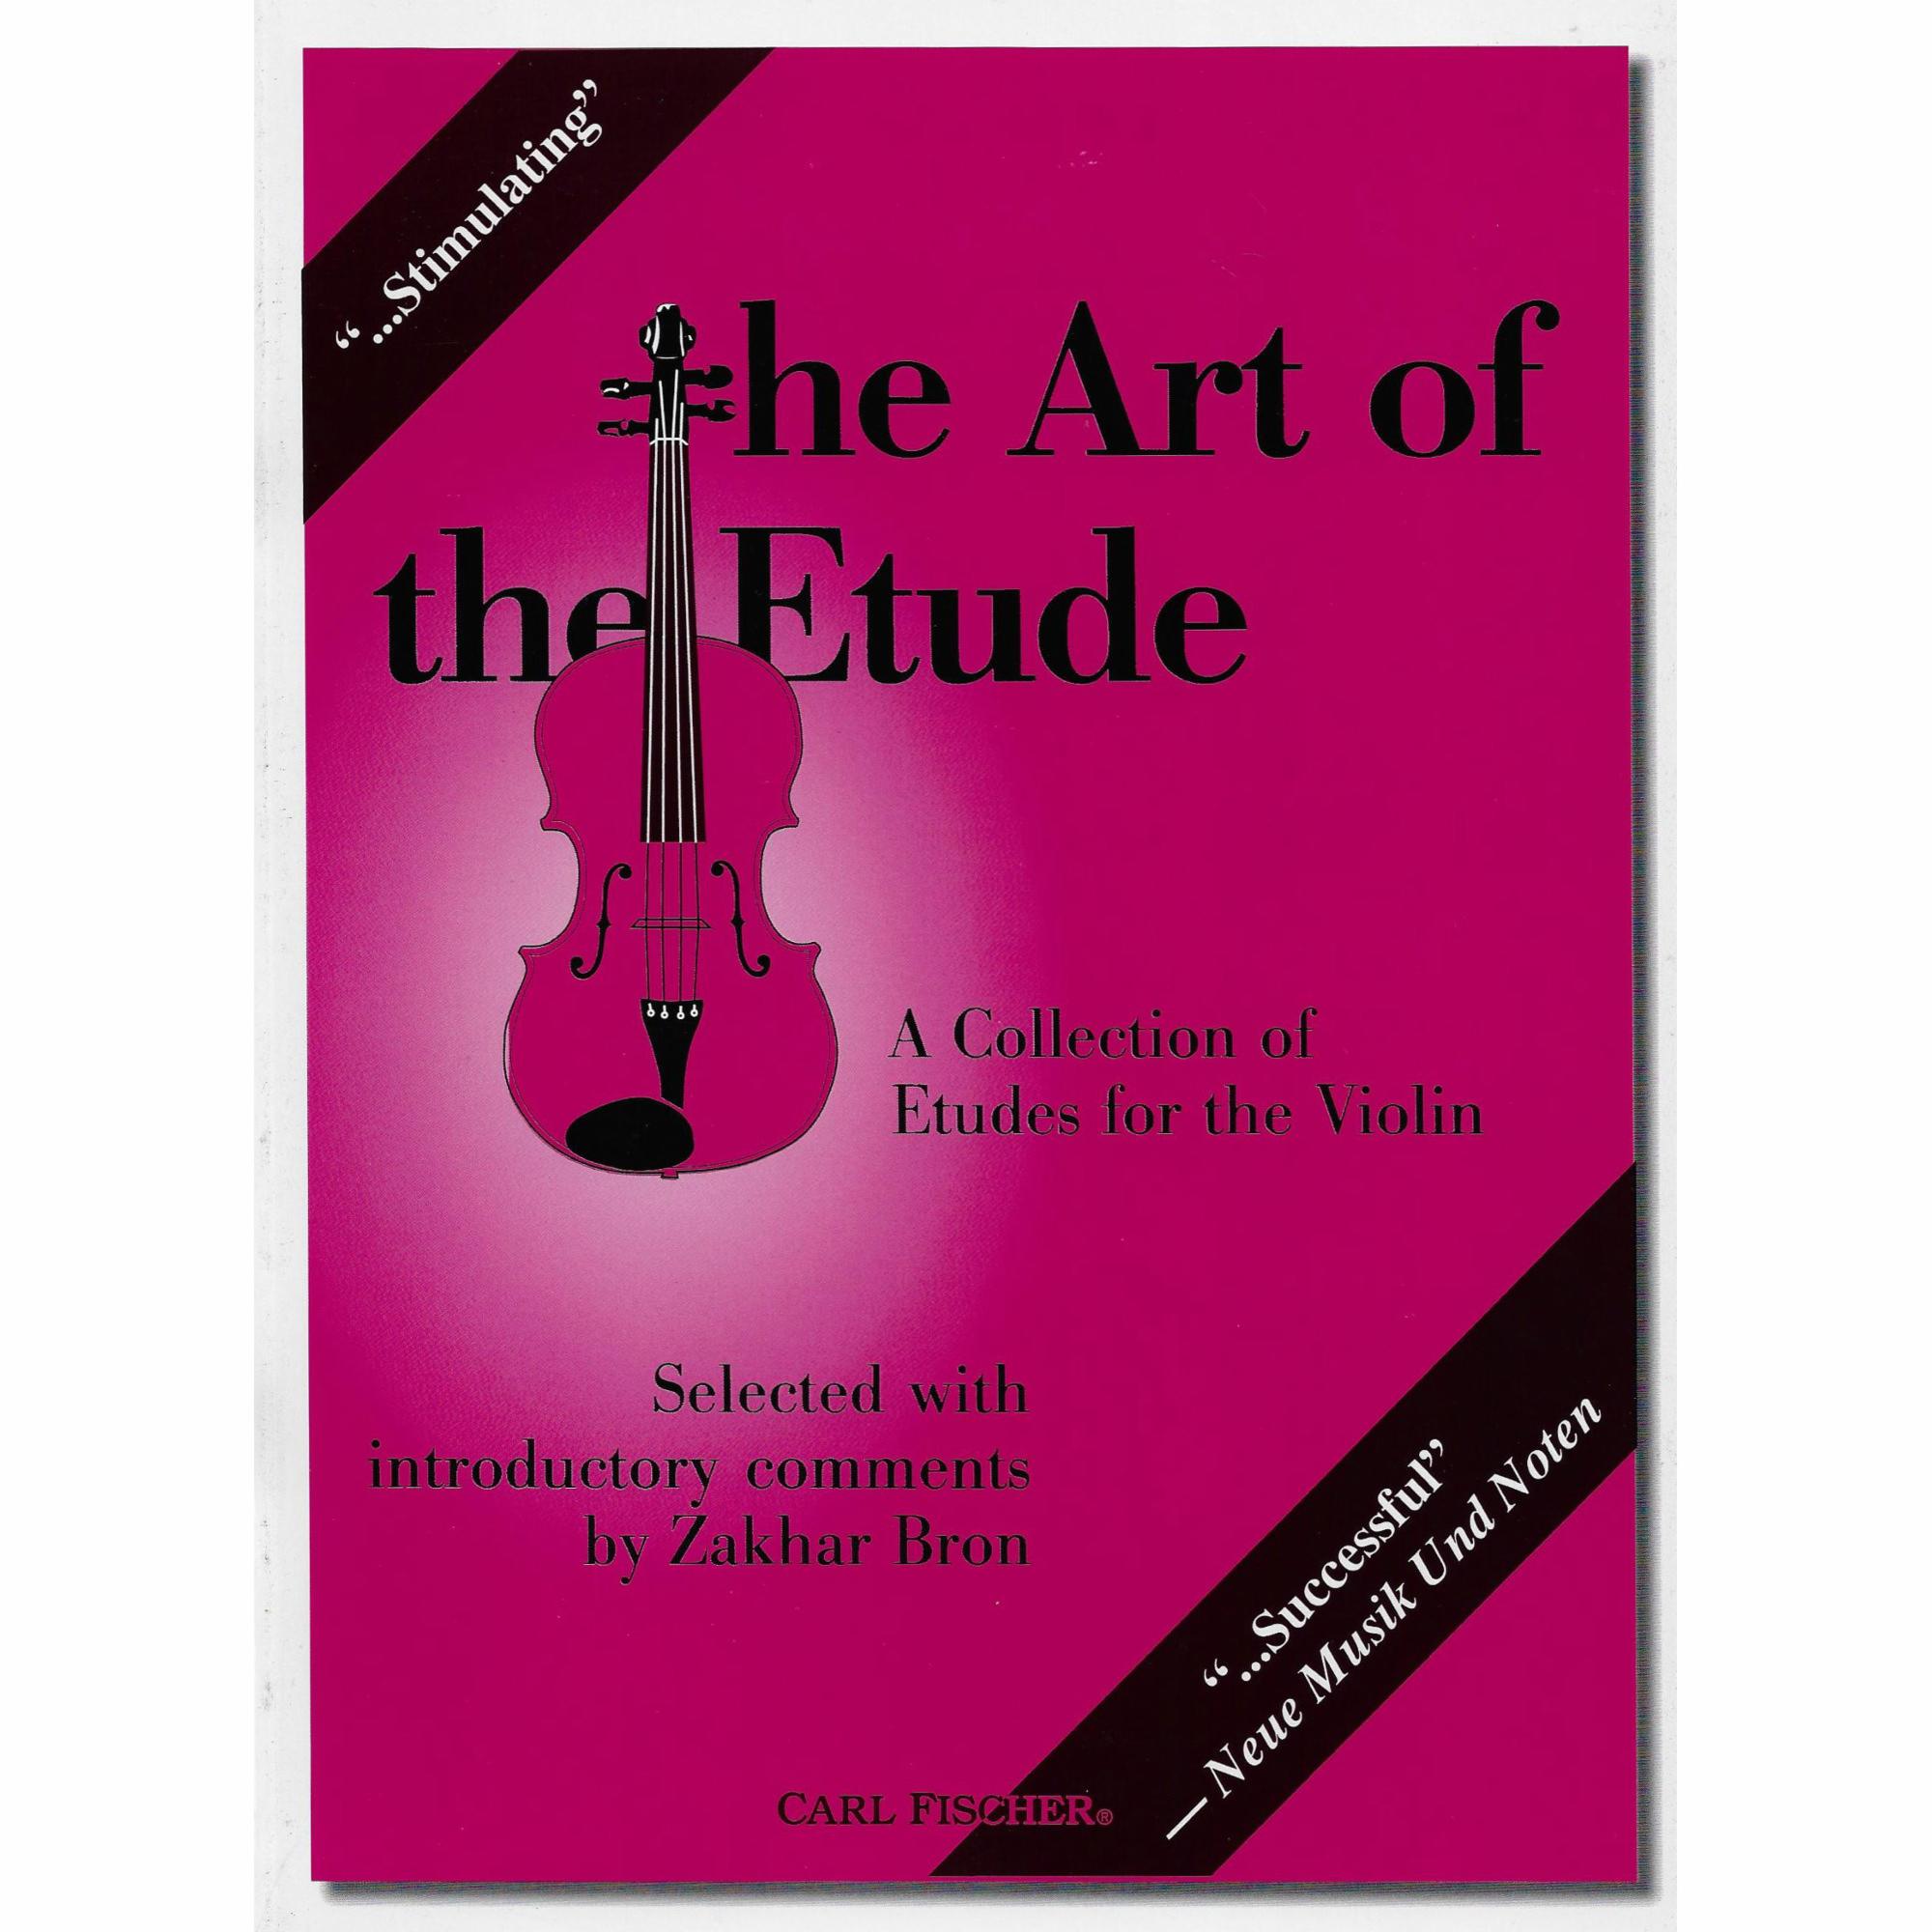 The Art of the Etude for Violin